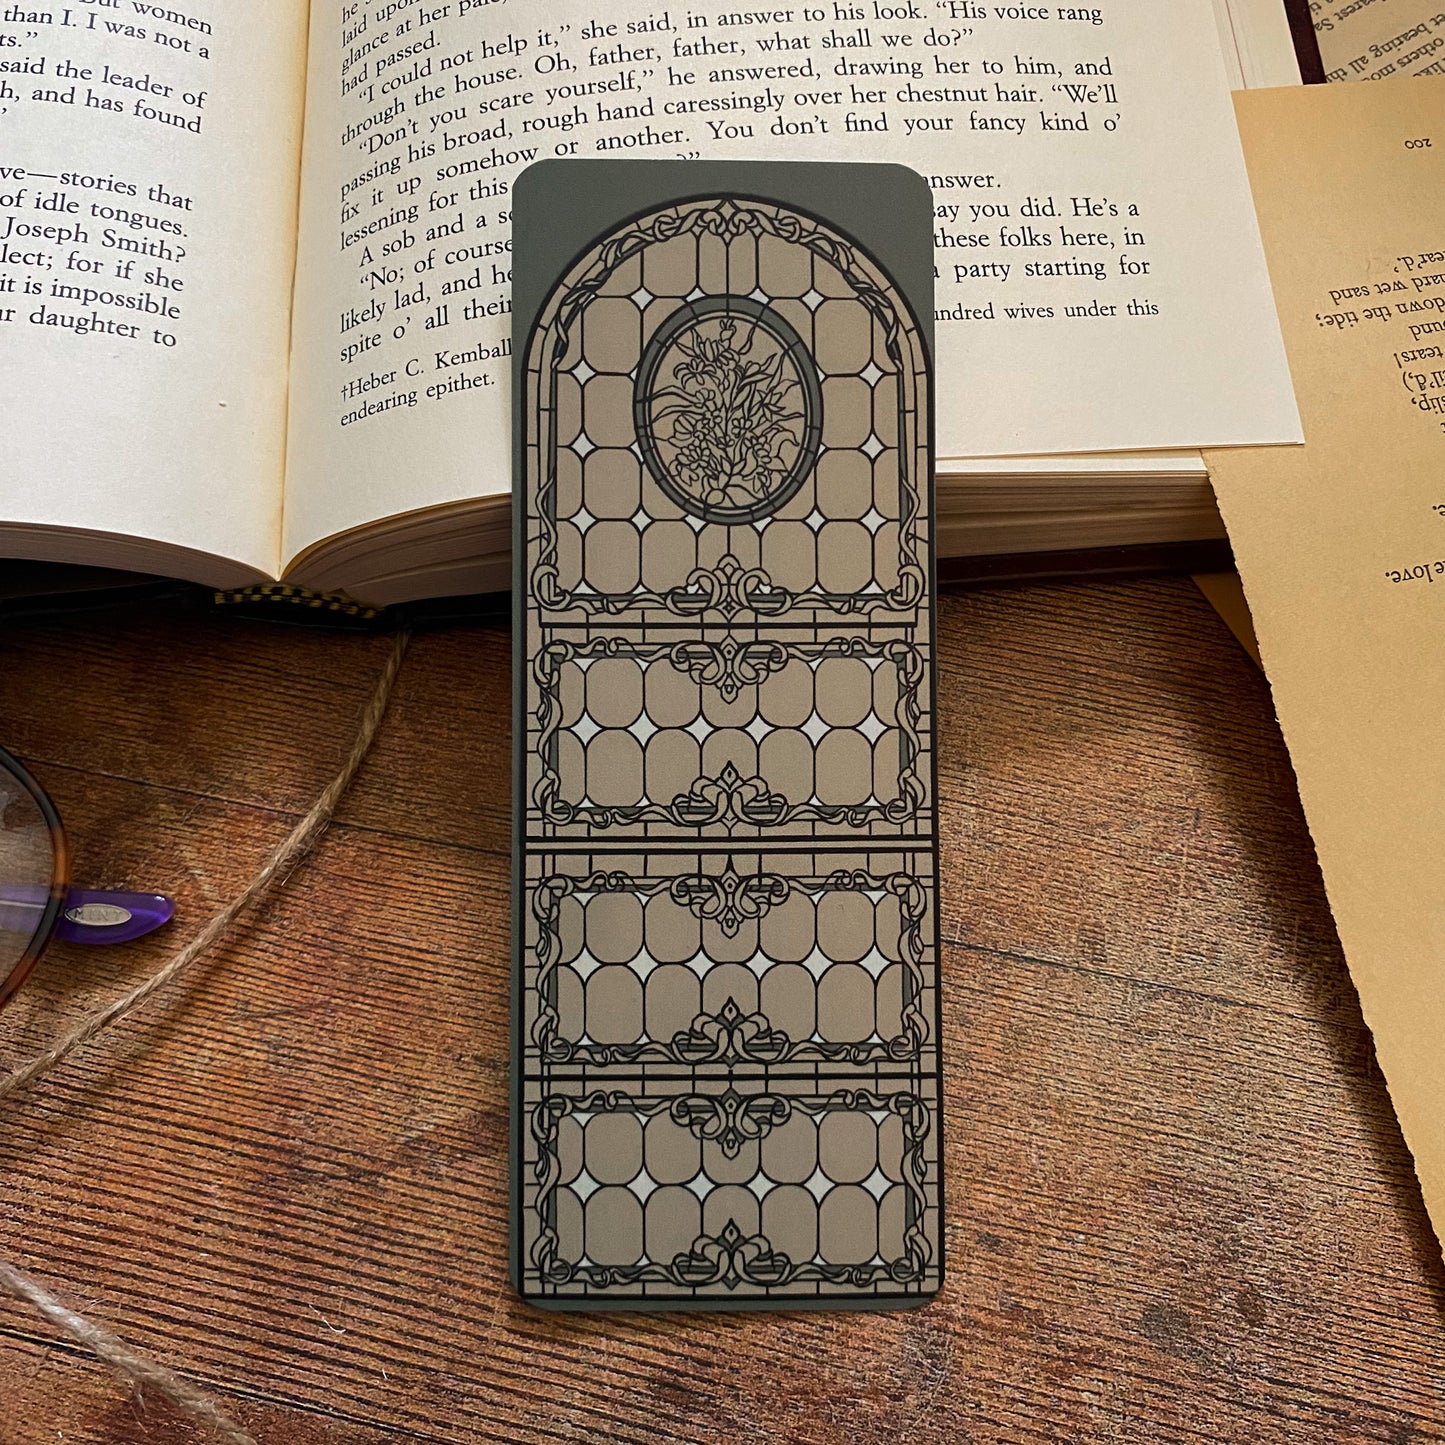 Stained Glass Window Bookmark